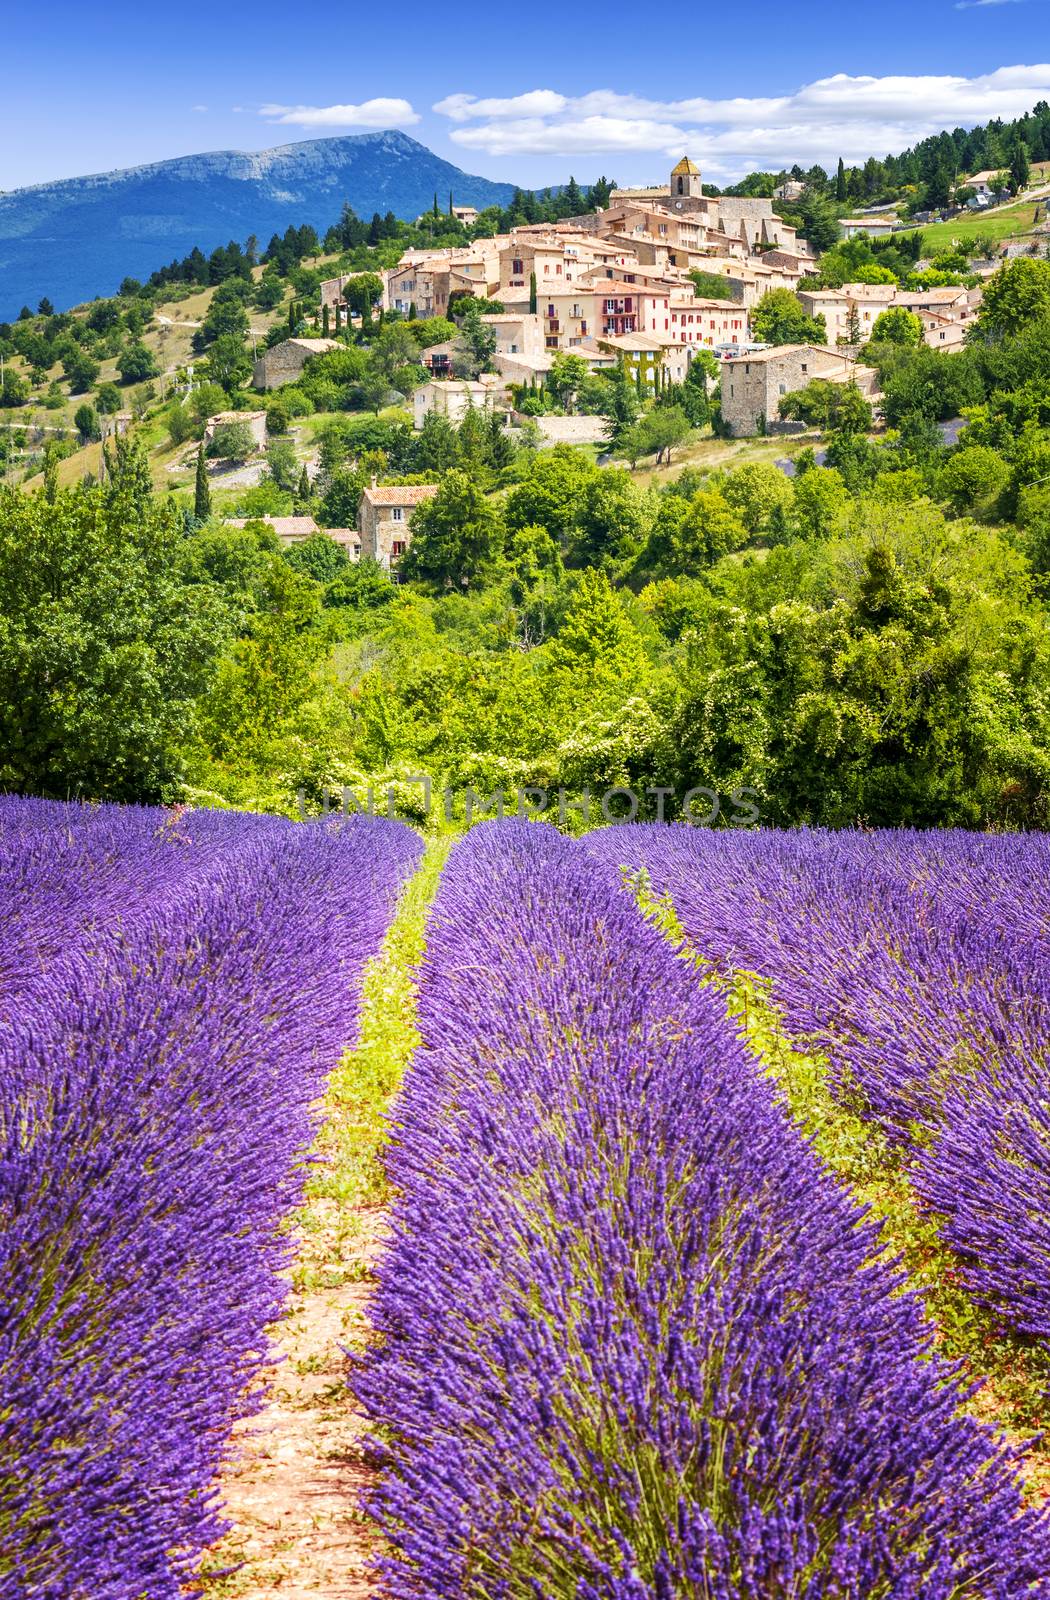 Lavender field and village, France. by ventdusud